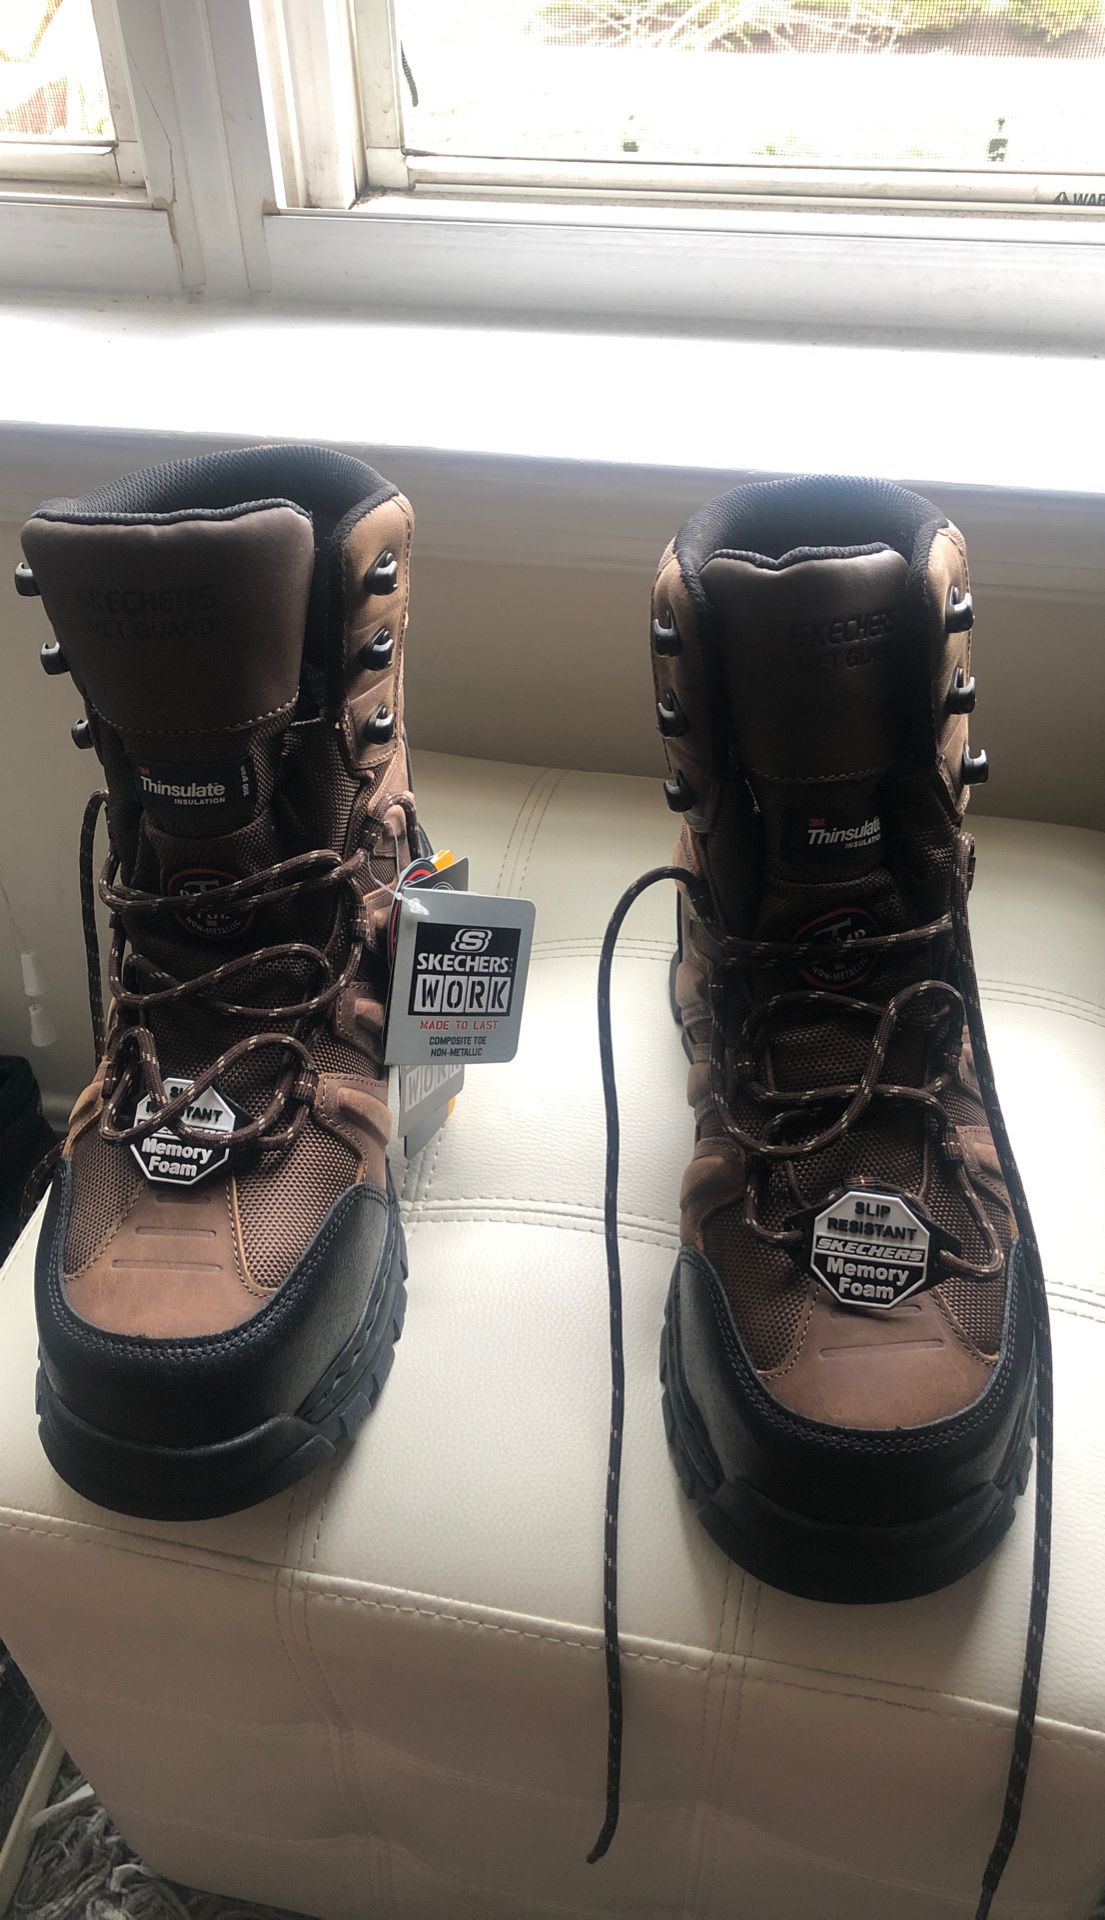 Skechers work boots size 9